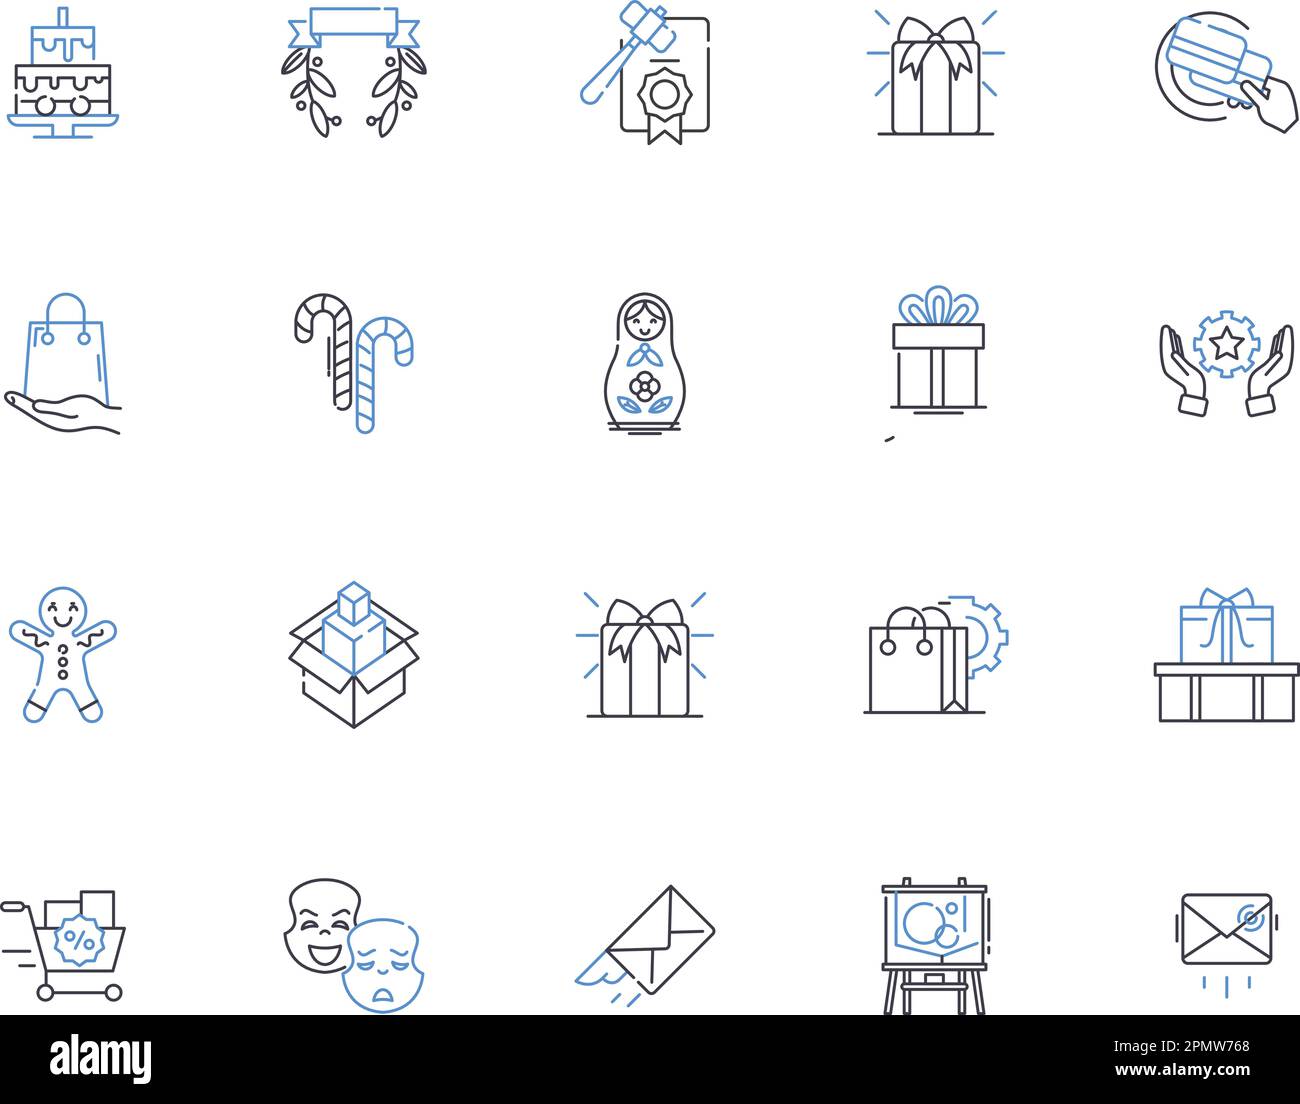 Gifts outline icons collection. Present, Birthday, Souvenir, Keepsake, Offering, Token, Surprise vector and illustration concept set. Trinket, Goody Stock Vector